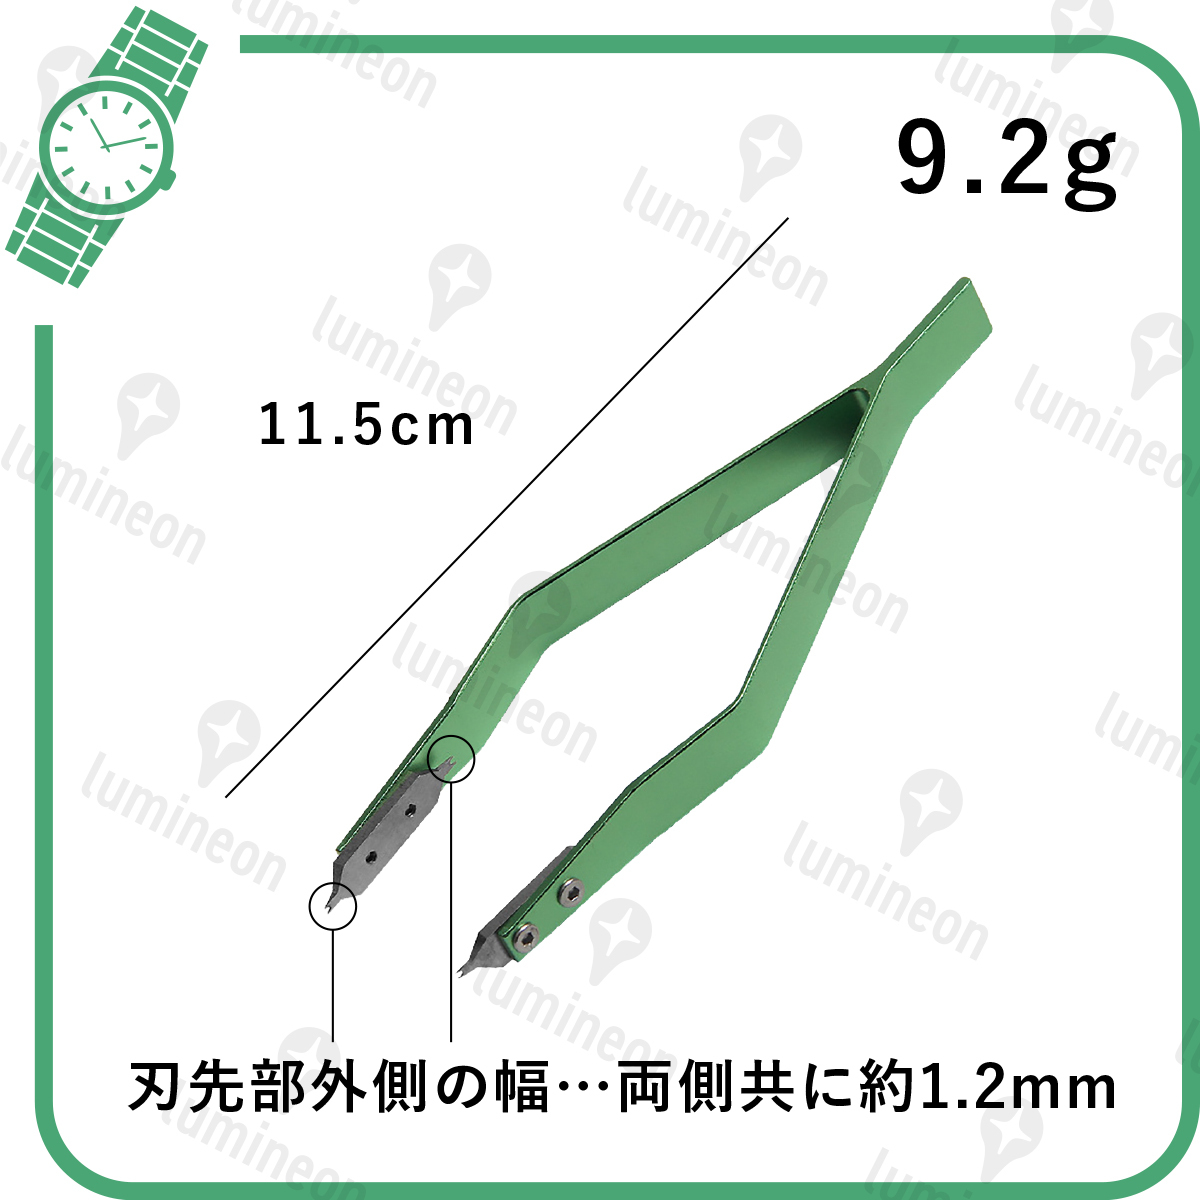  spring stick removing high class high precision green green color both grip both .. type wristwatch spring stick remove breath for tweezers Rolex Omega etc. correspondence g026e 3